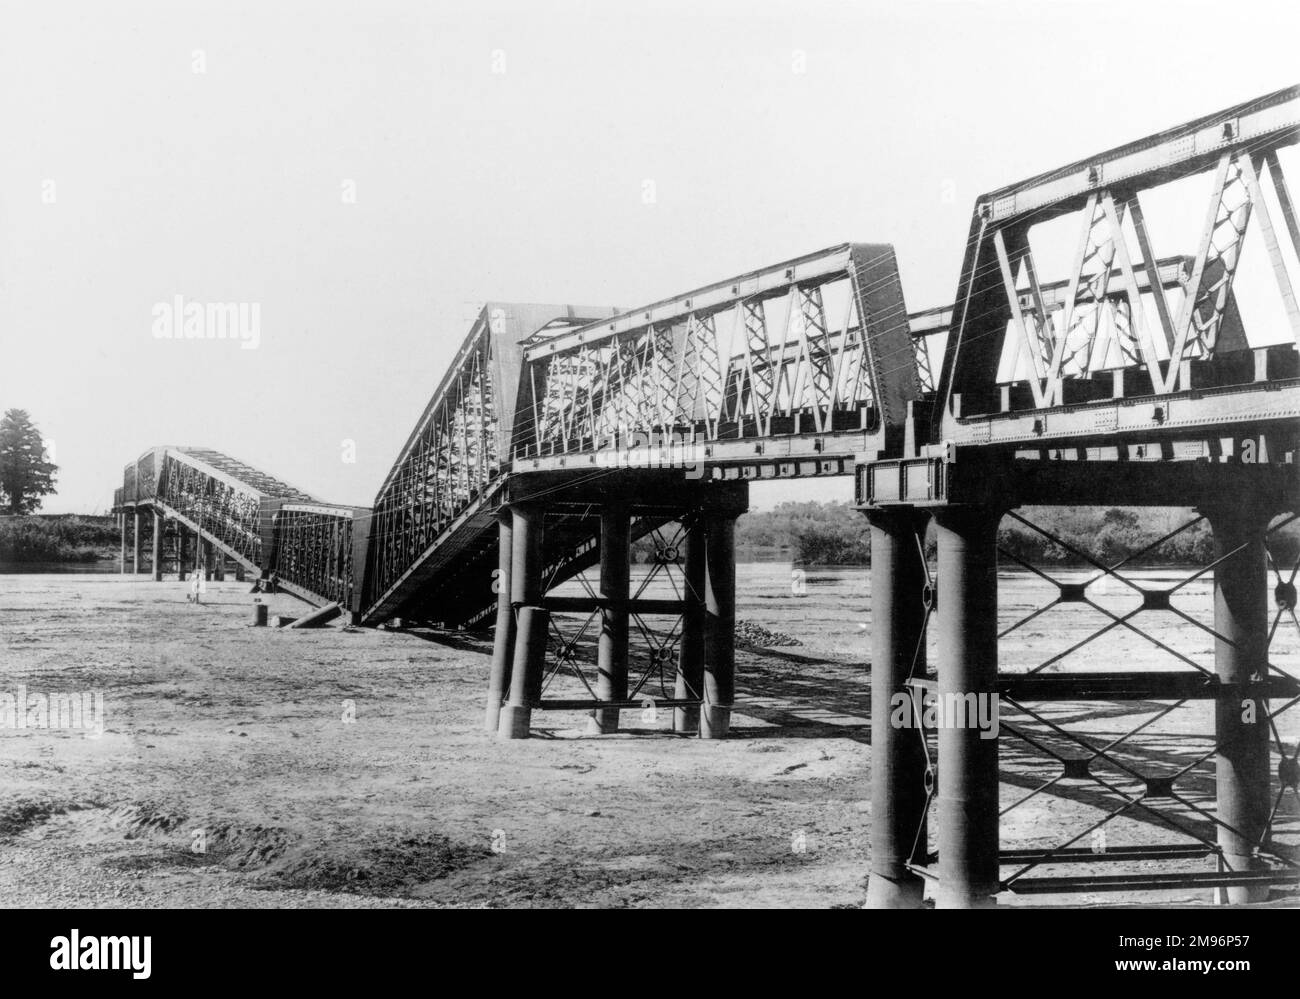 Side view of the Nagara Gawa Railway Bridge, collapsed as a result of the violent tremors of the 1891 Mino-Owari Earthquake that struck the Nobi Plain area of Japan. Stock Photo